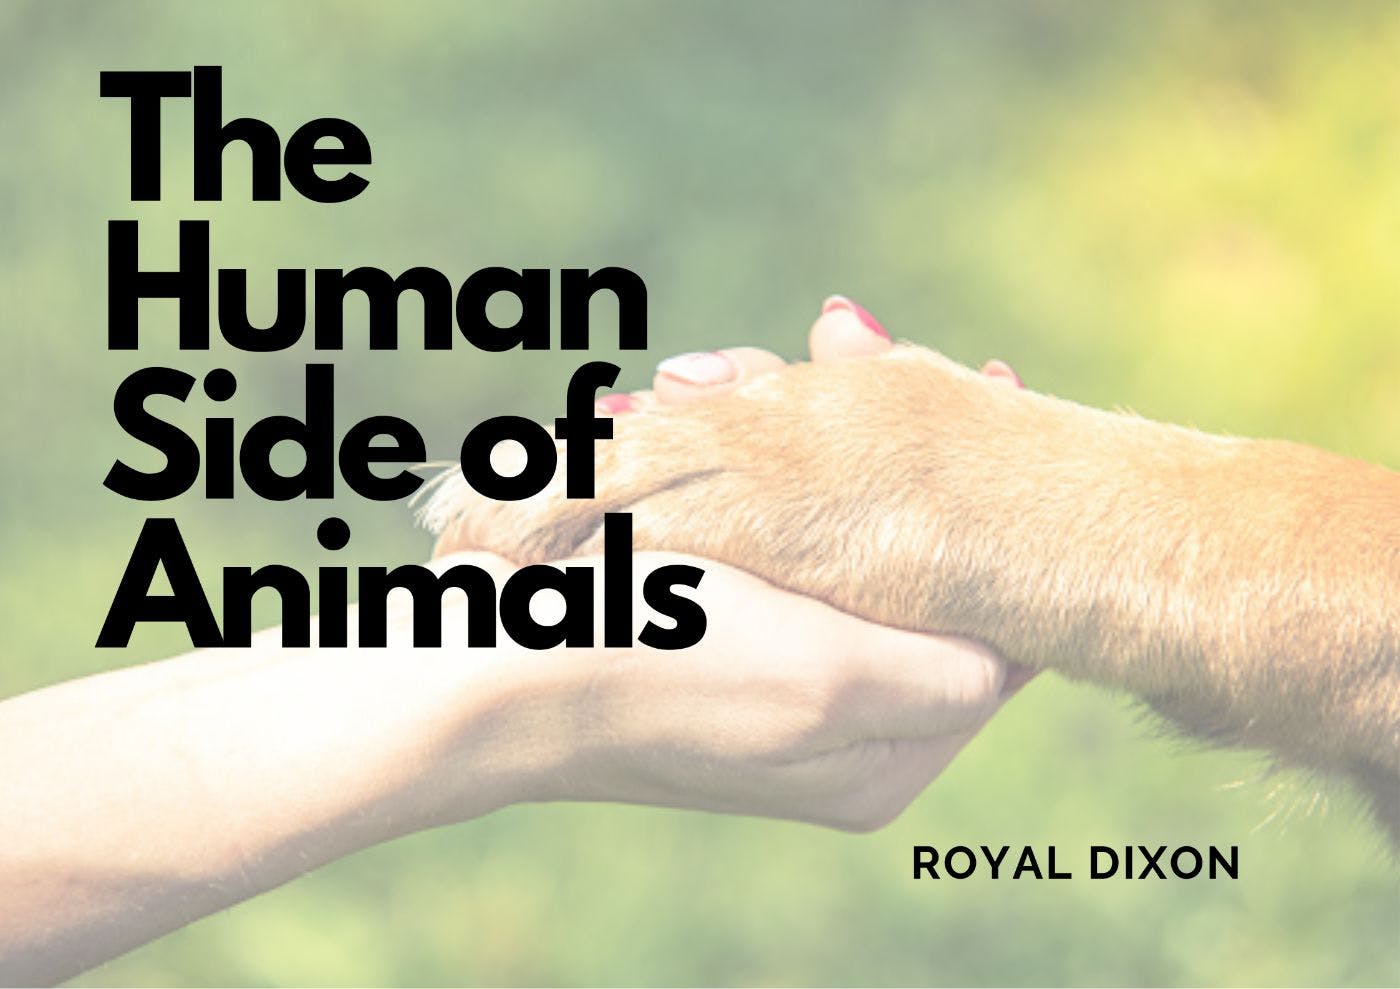 featured image - The Human Side of Animals by Royal Dixon - Table of Links